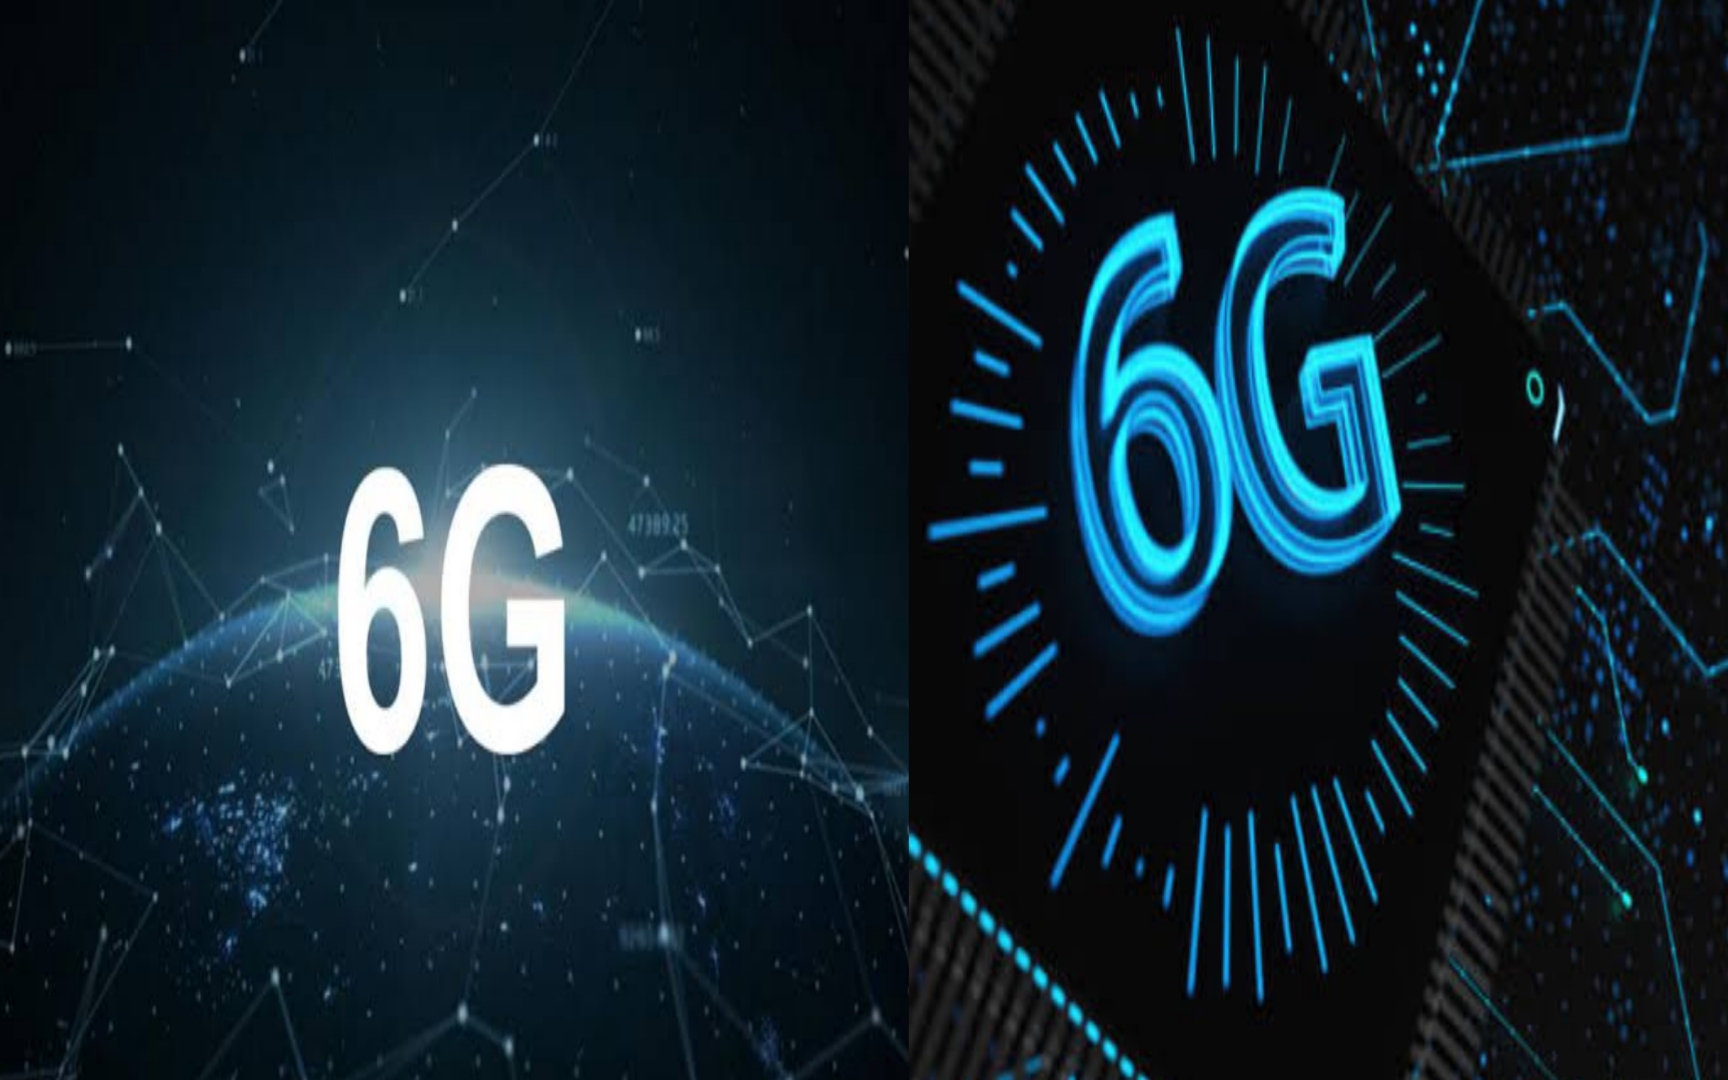 The 6G network helps to experience the internet using all 5 senses, not just sight and hearing